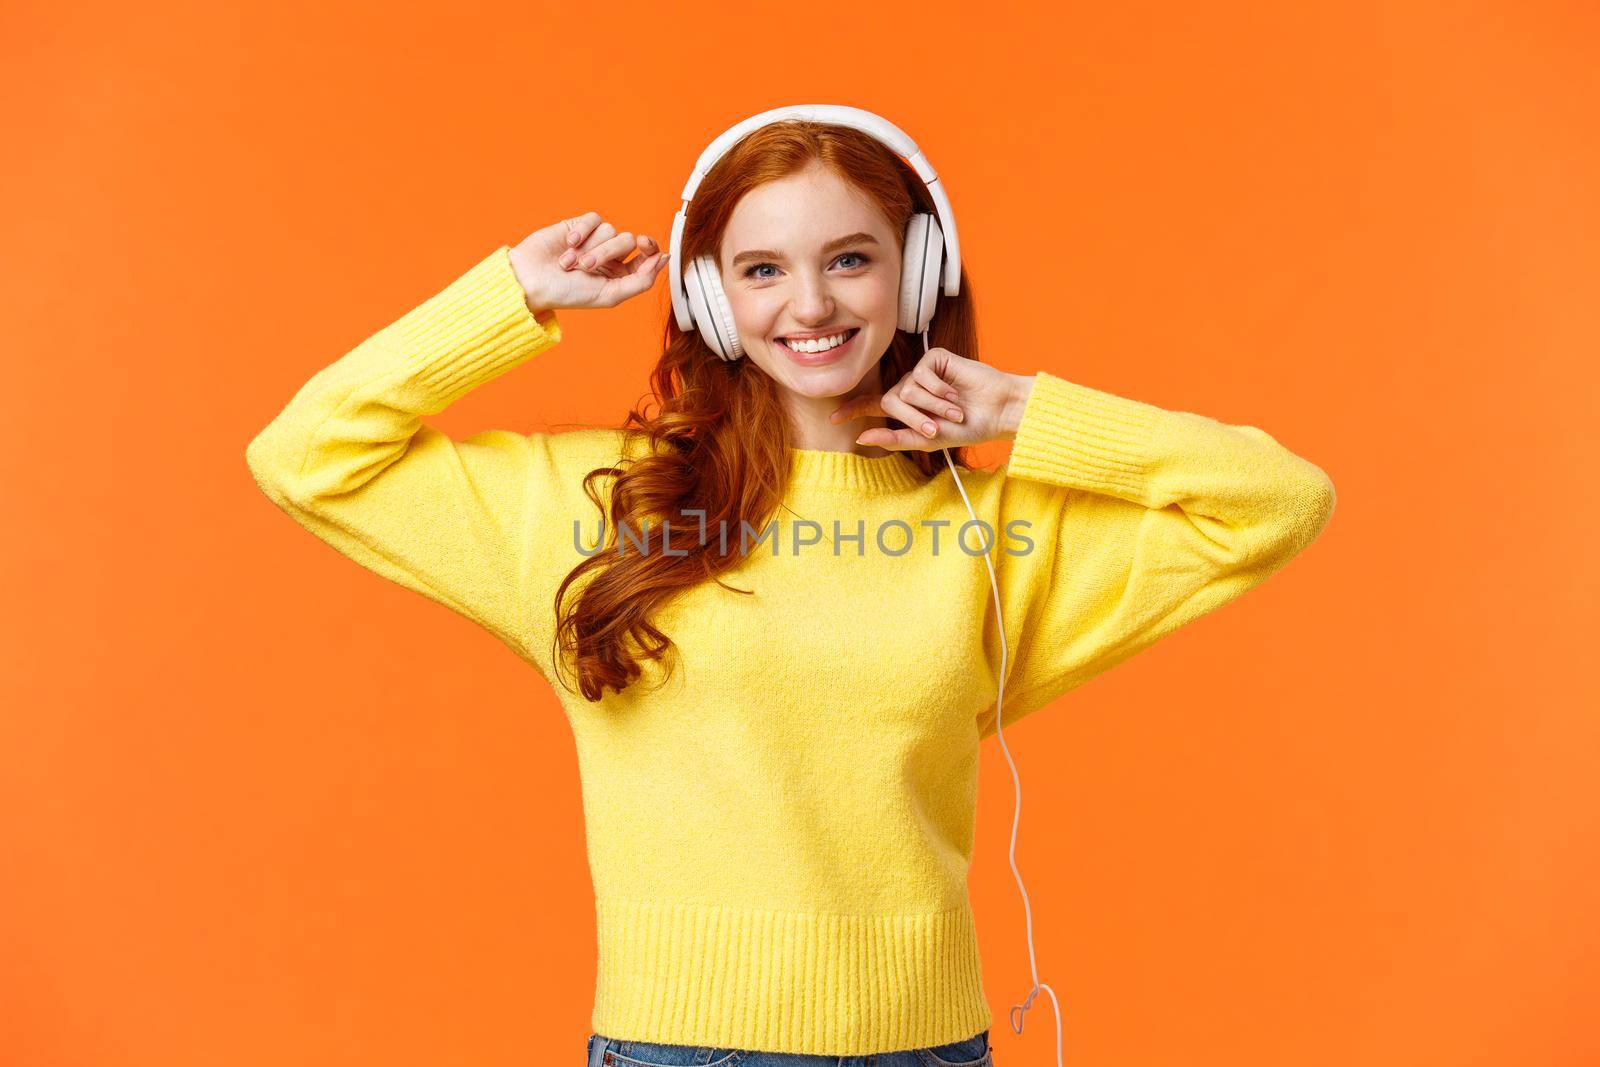 Happy and carefree excited redhead hipster girl like her new headphones, dancing with hands lifted up and smiling enjoy listening music over orange background, boost mood with favorite song.